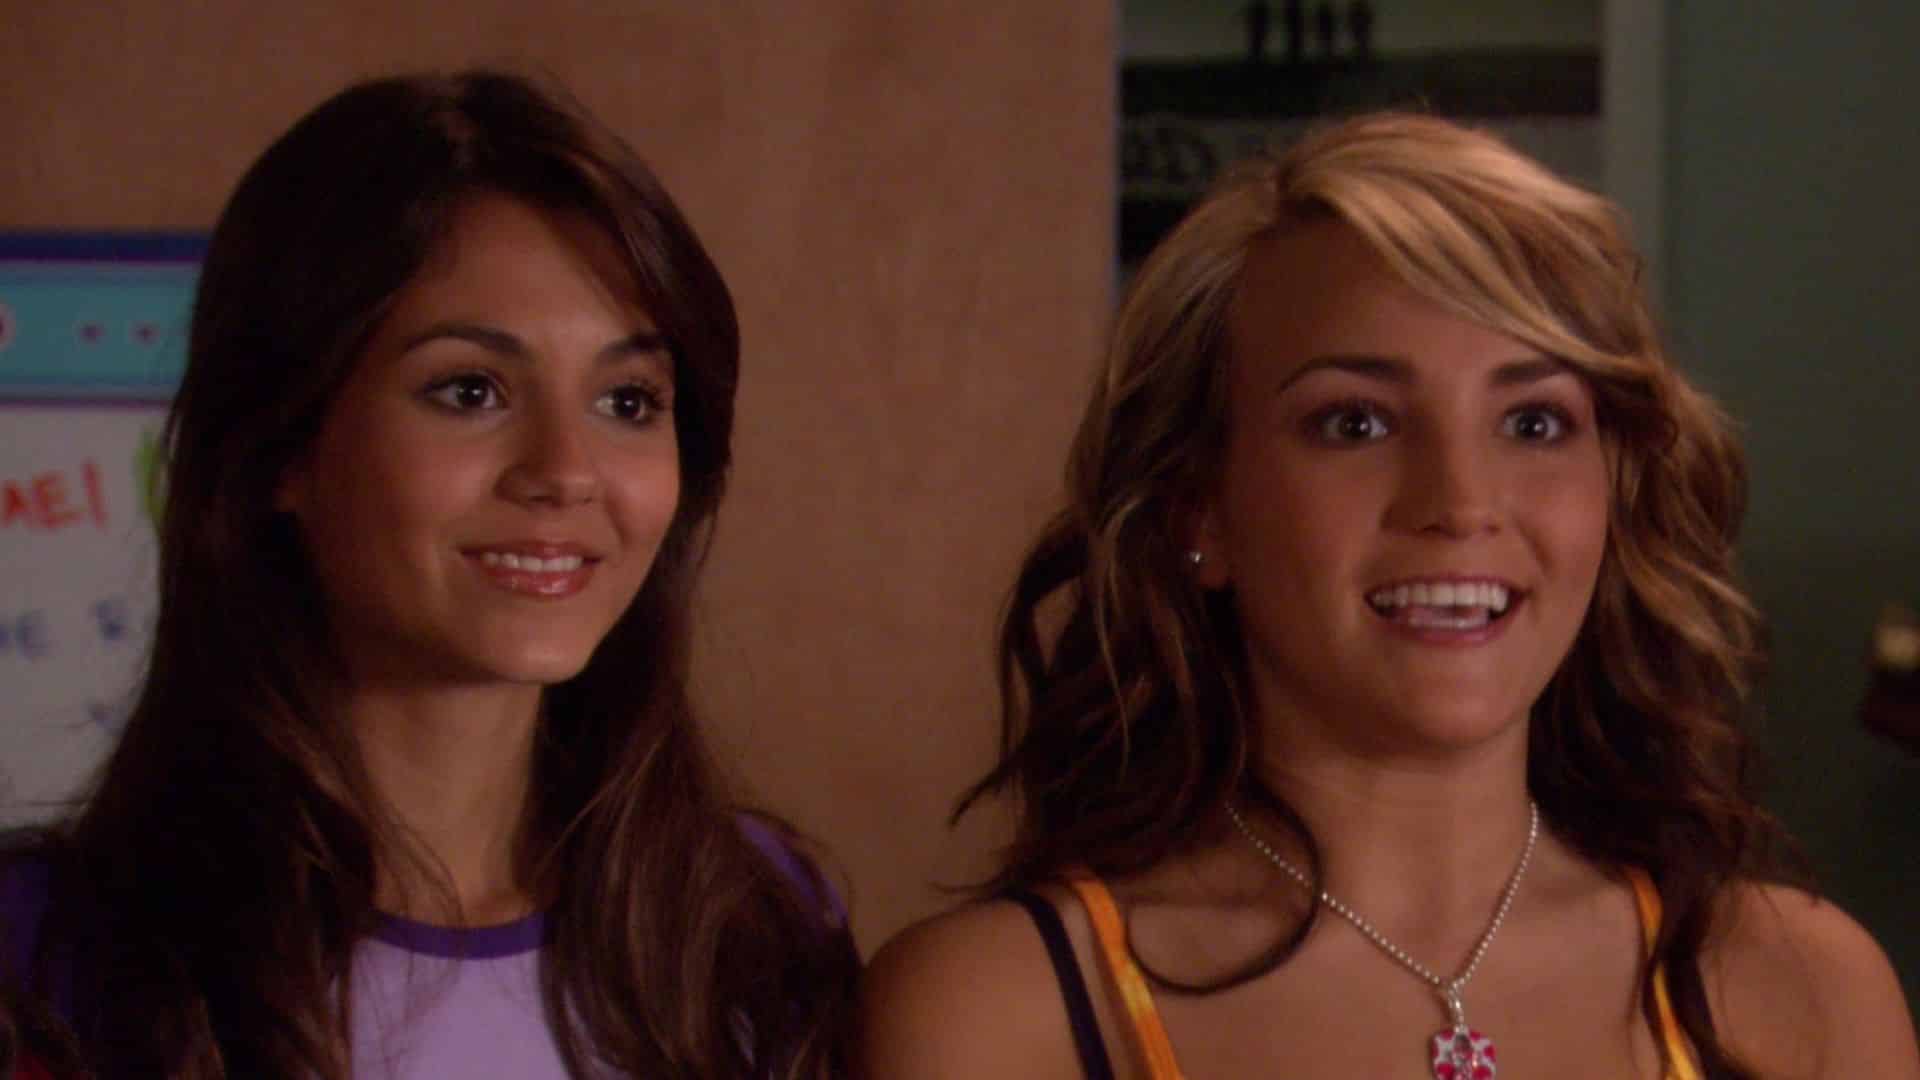 Zoey 101 Season 3-4 Came On Netflix And Fans Are Going Silly